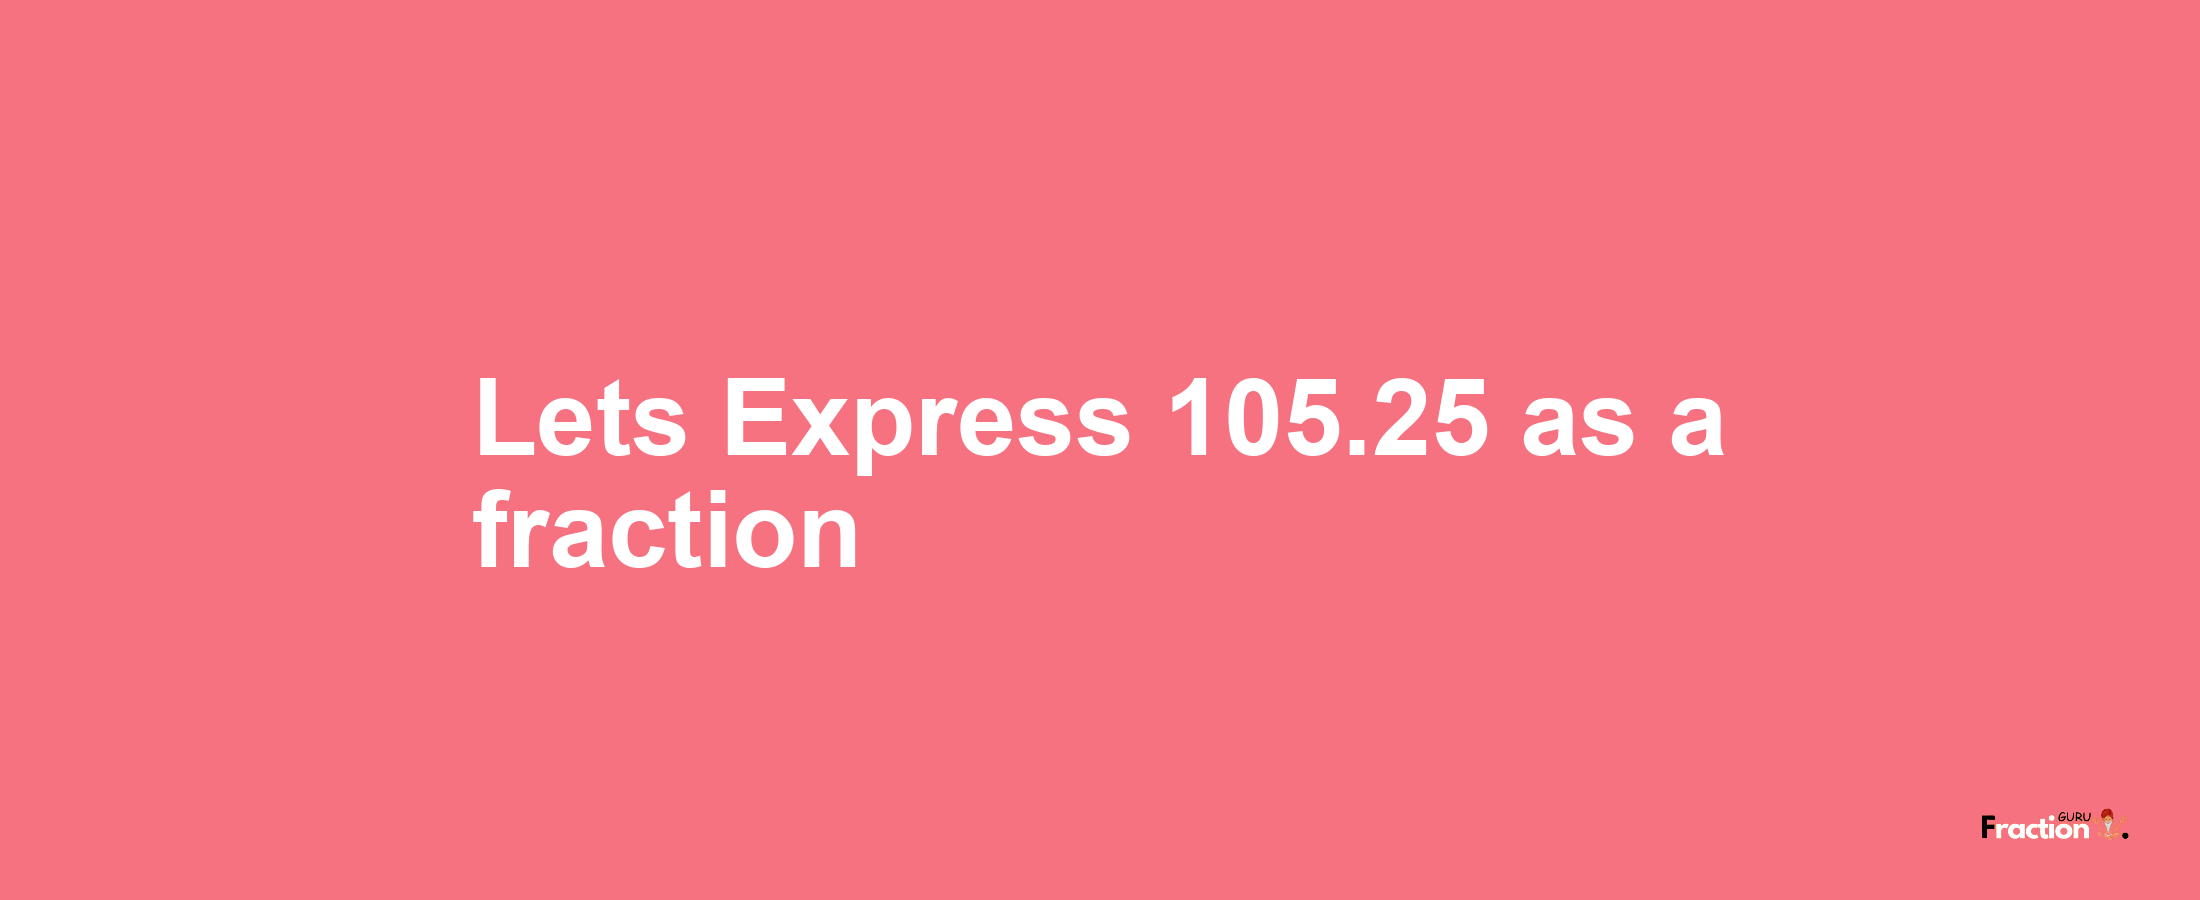 Lets Express 105.25 as afraction